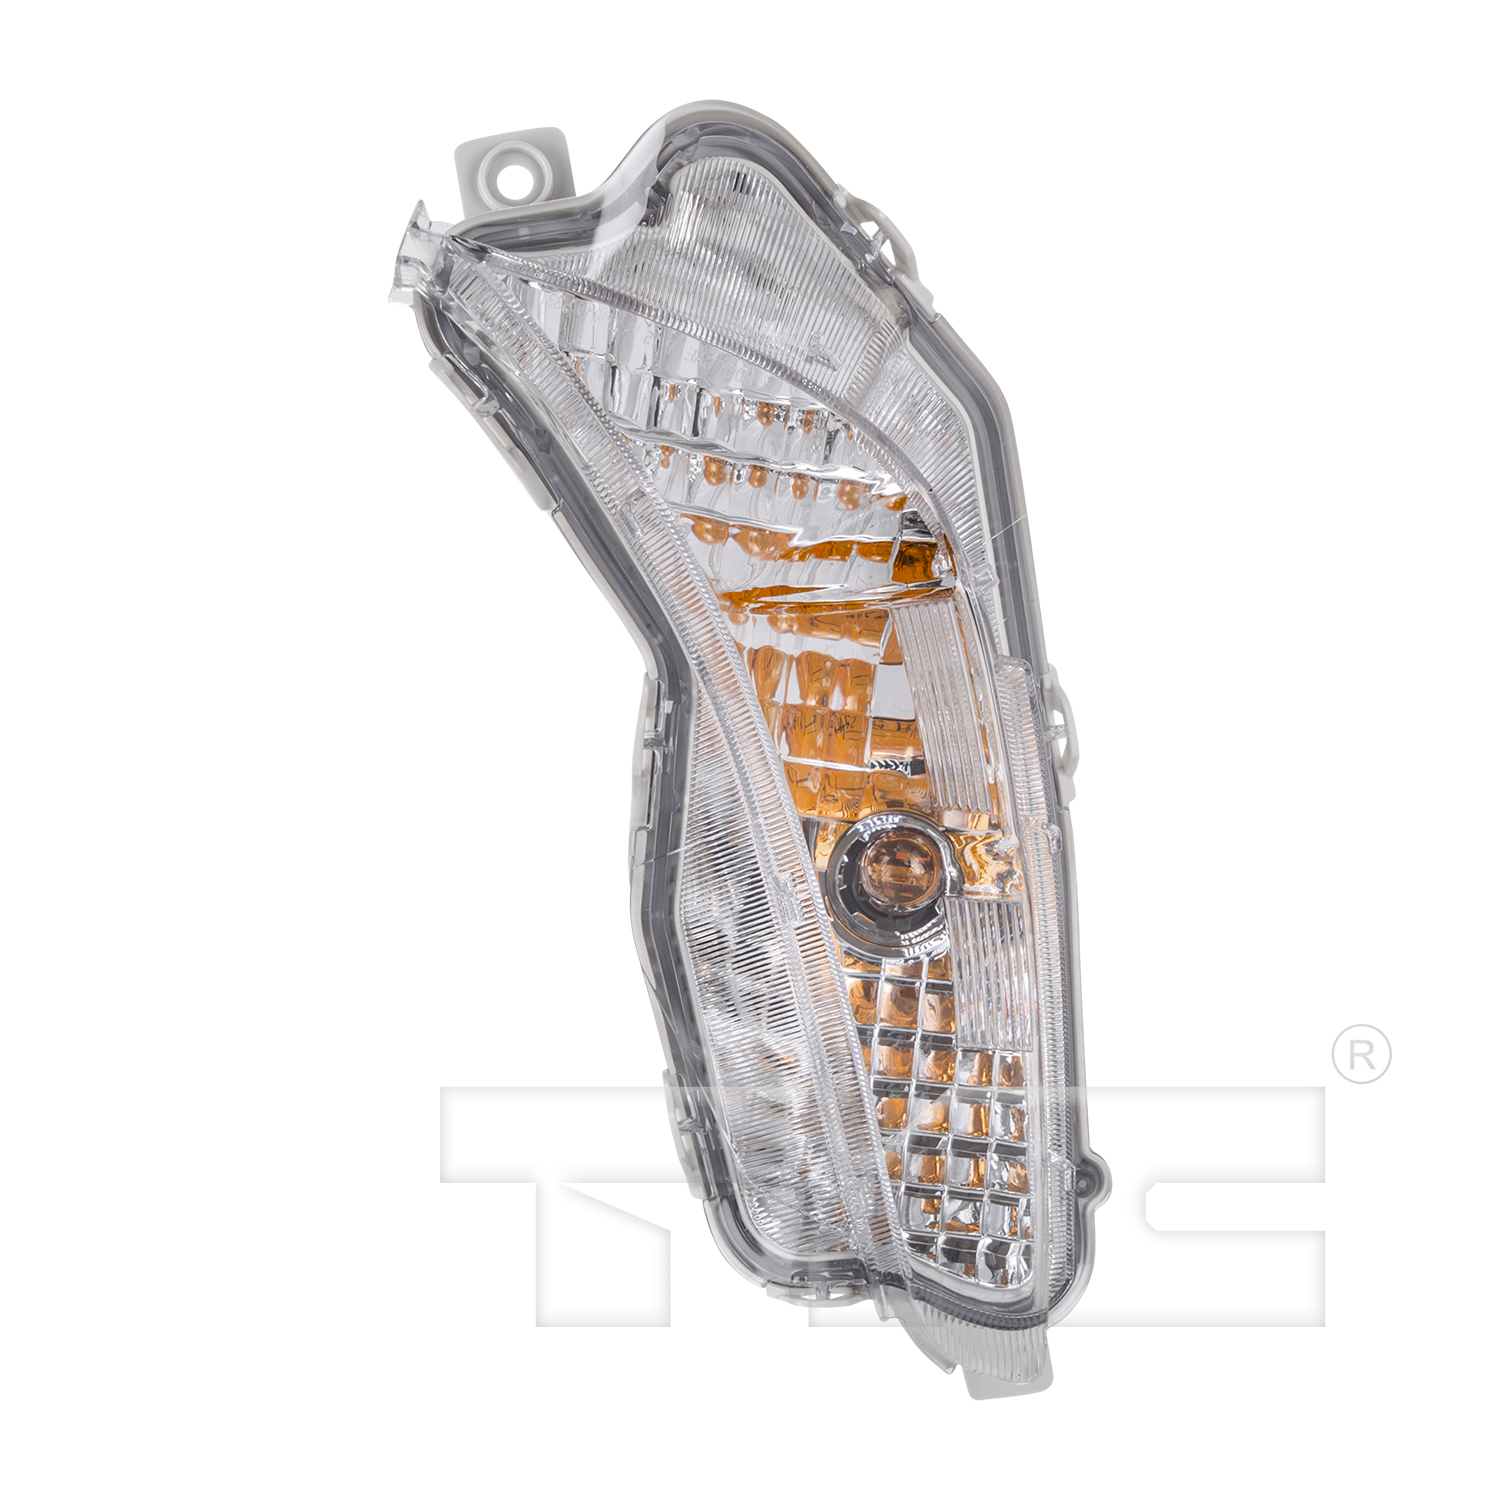 Aftermarket LAMPS for TOYOTA - CAMRY, CAMRY,15-17,LT Front signal lamp